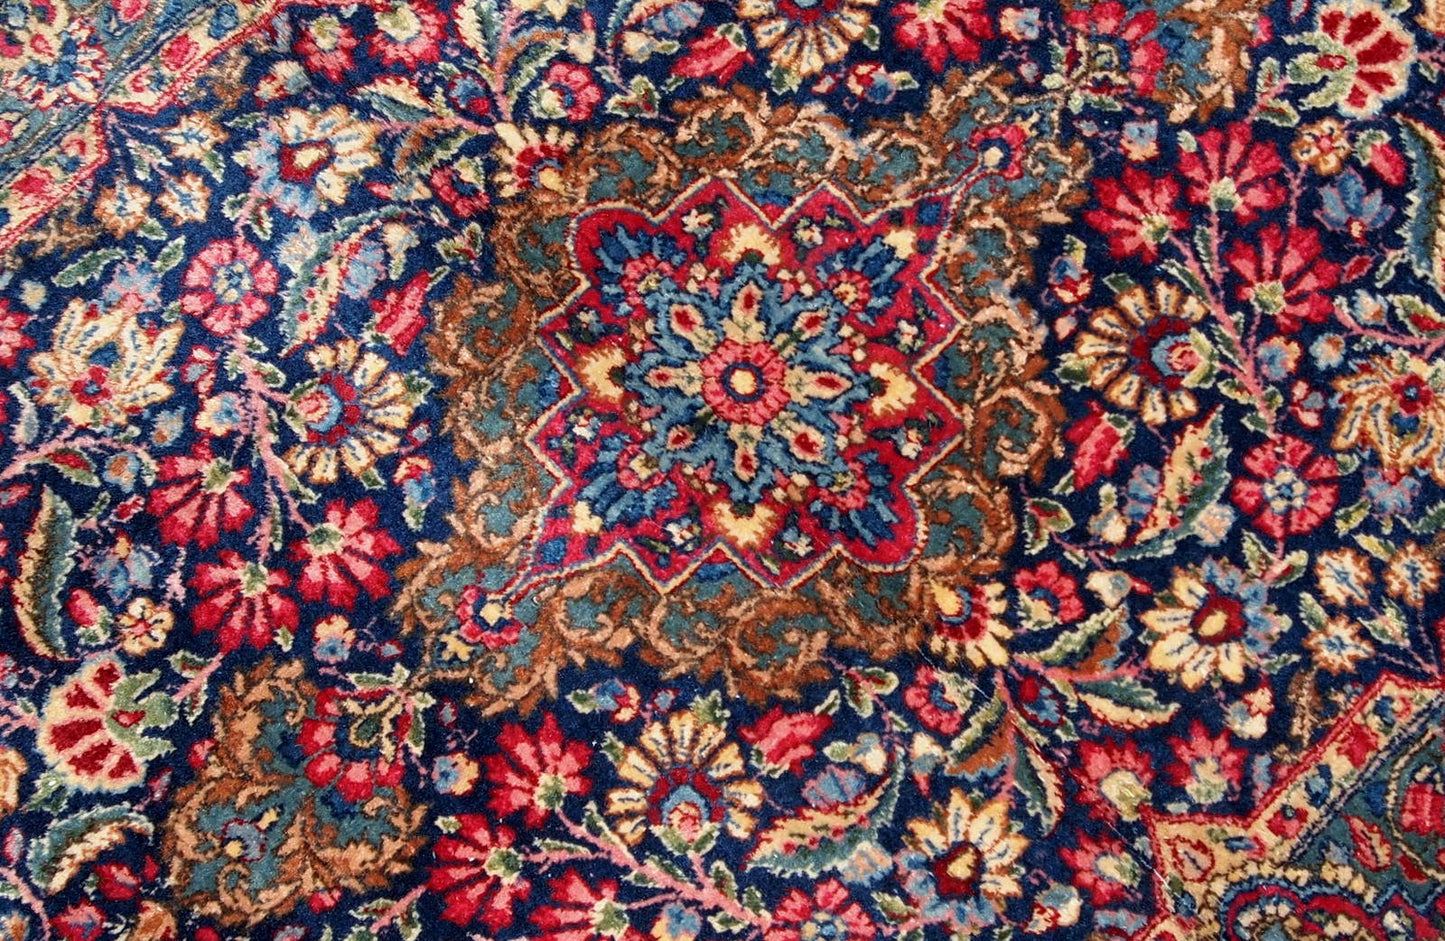 Handmade antique Kerman rug from the beginning of 20th century. The rug is in original good condition made in colorful shades and floral design.